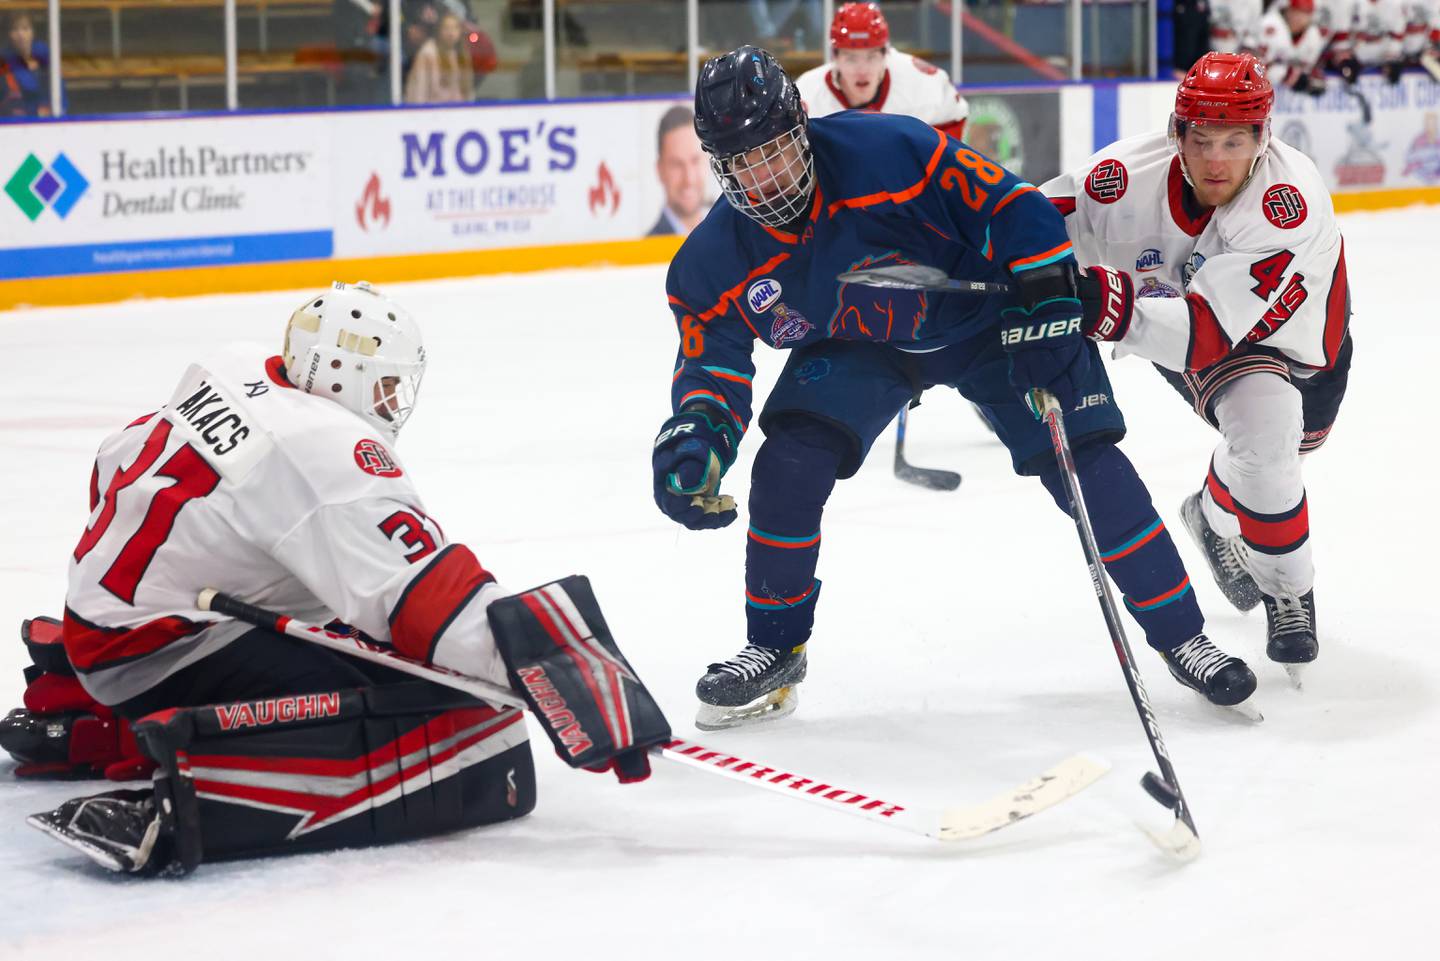 Anchorage Wolverines take on New Jersey in Robertson Cup championship